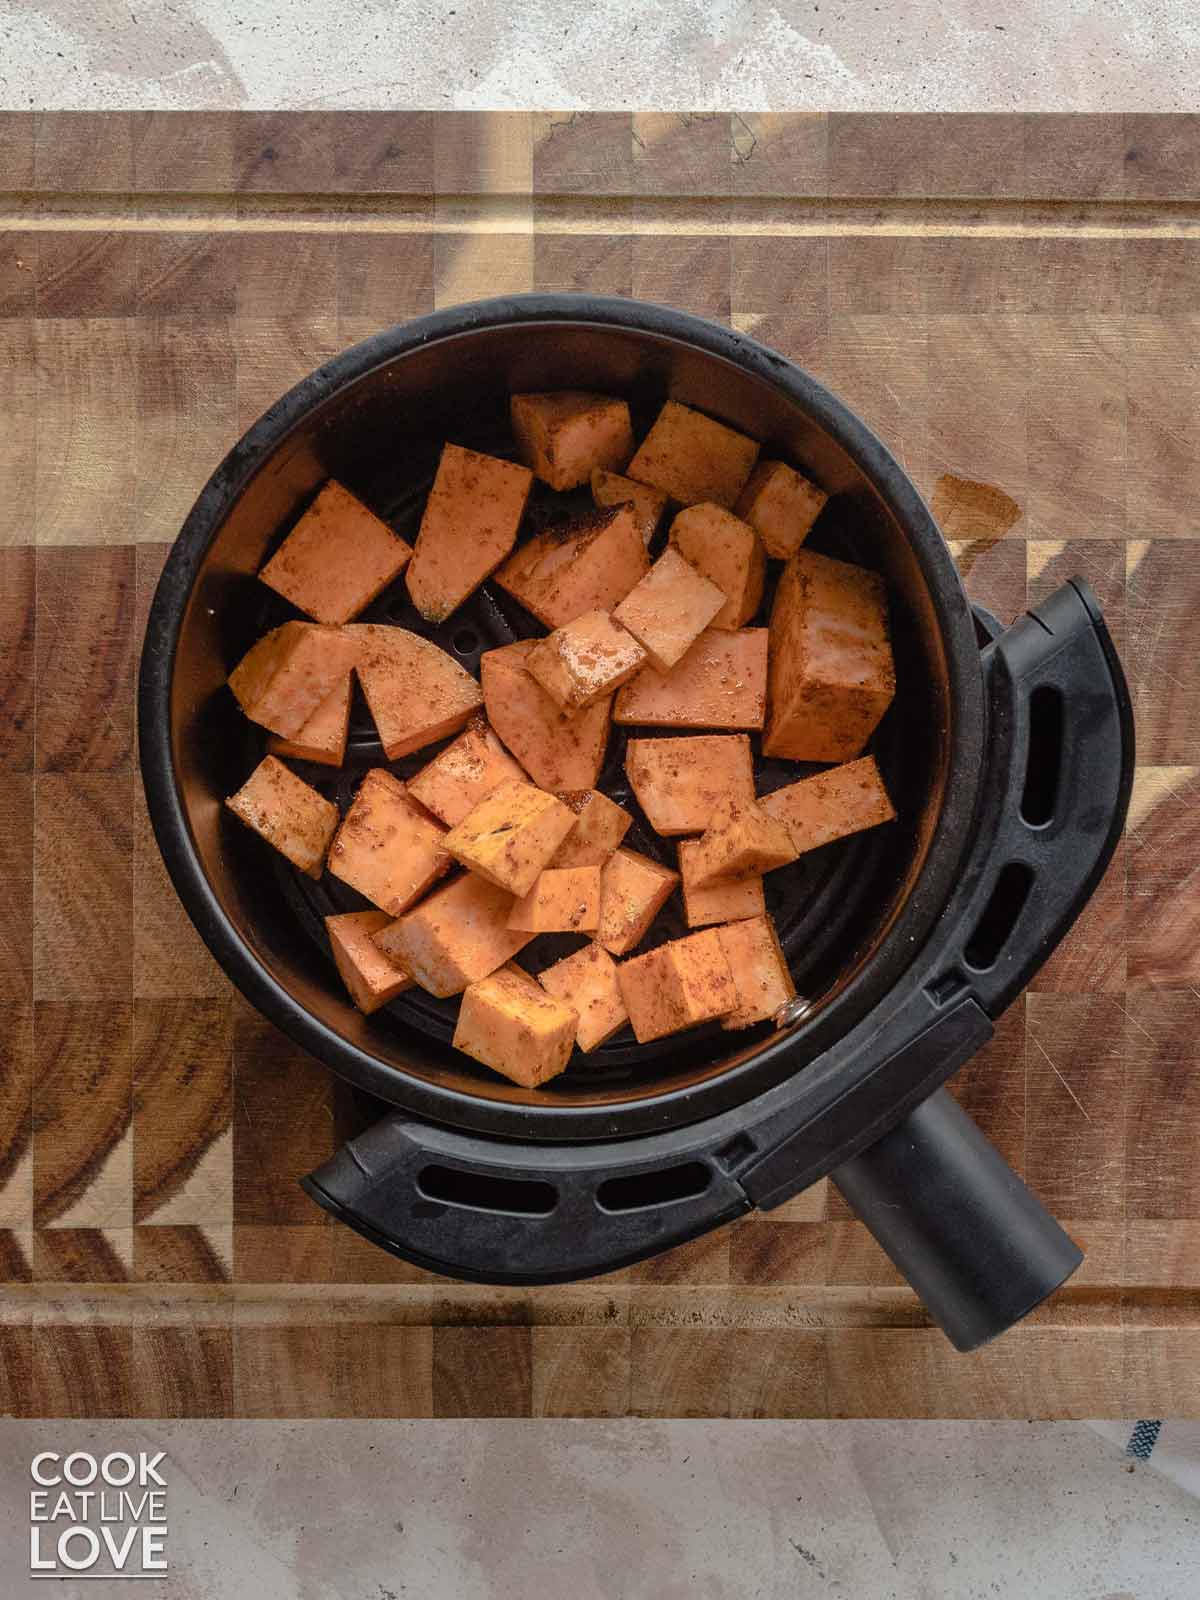 Sweet potatoes in the air fryer basket to cook.